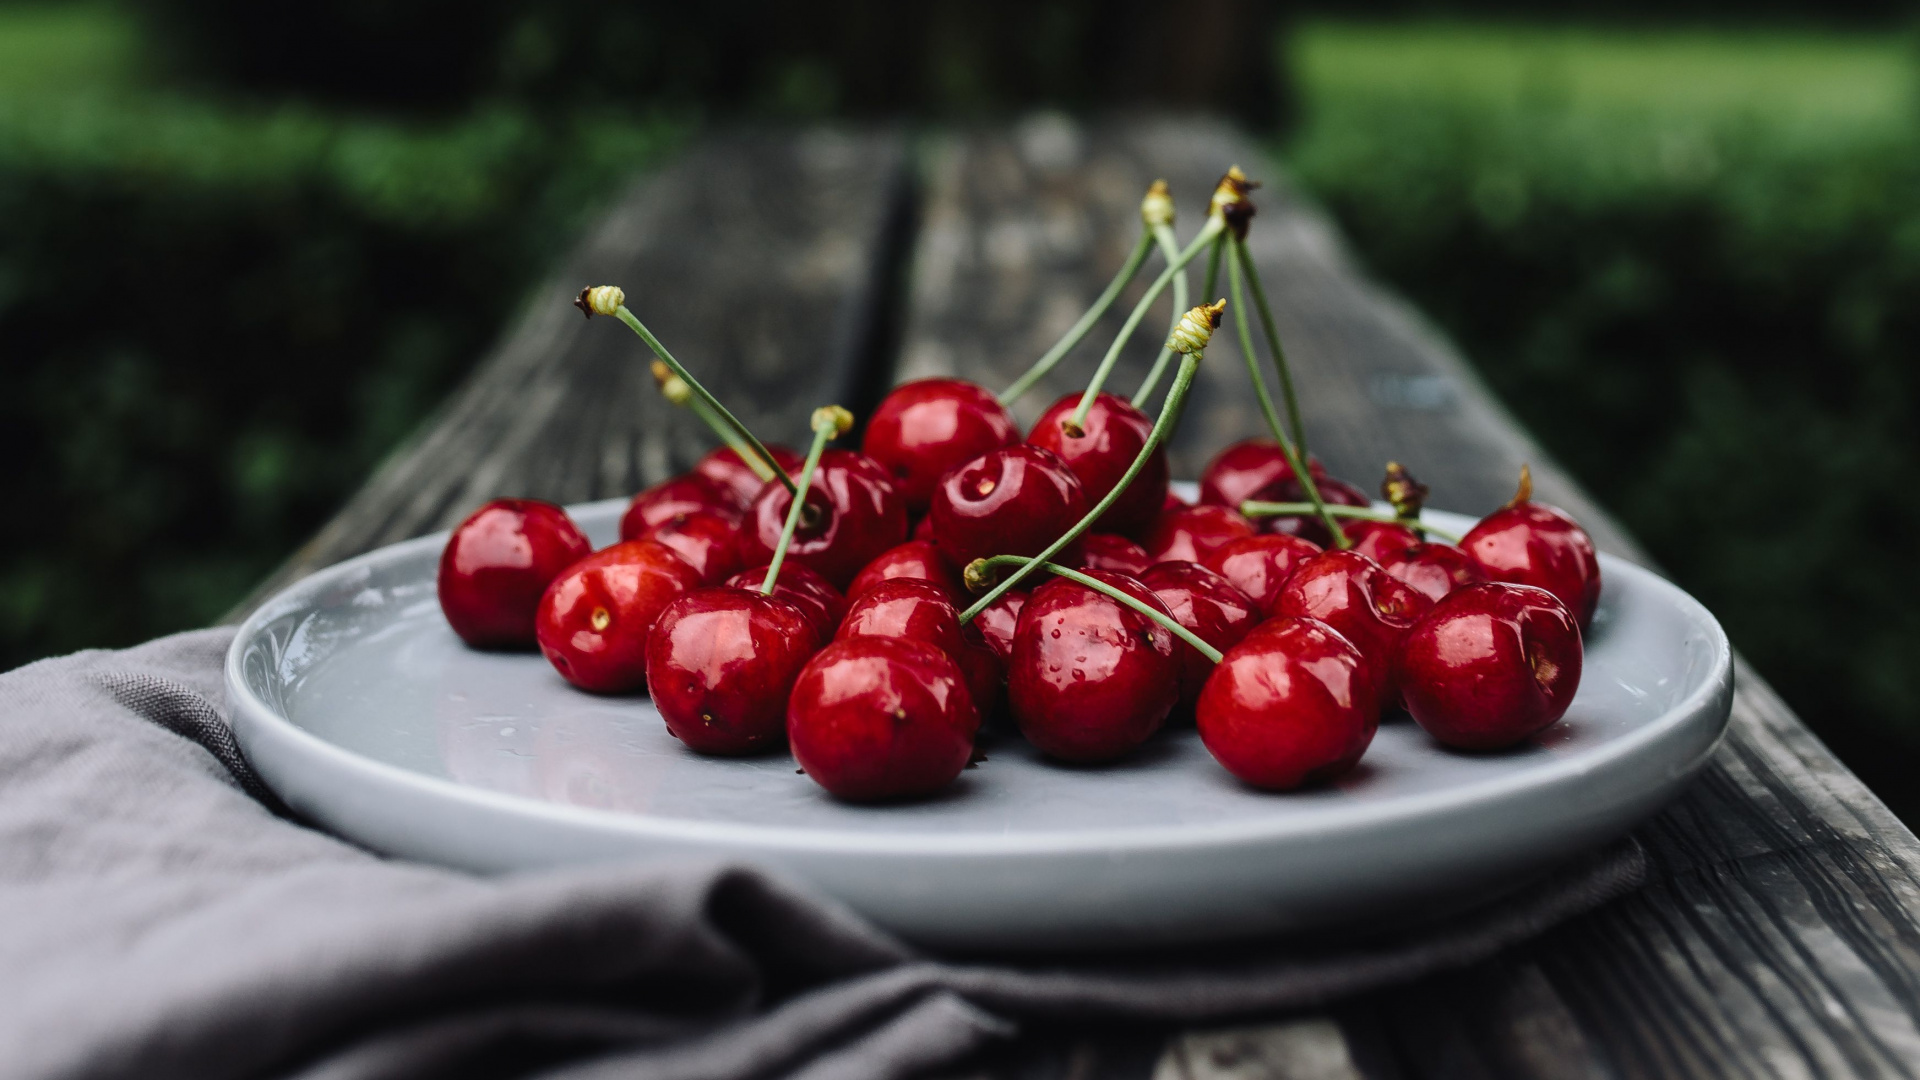 Red Cherries on White Ceramic Plate. Wallpaper in 1920x1080 Resolution